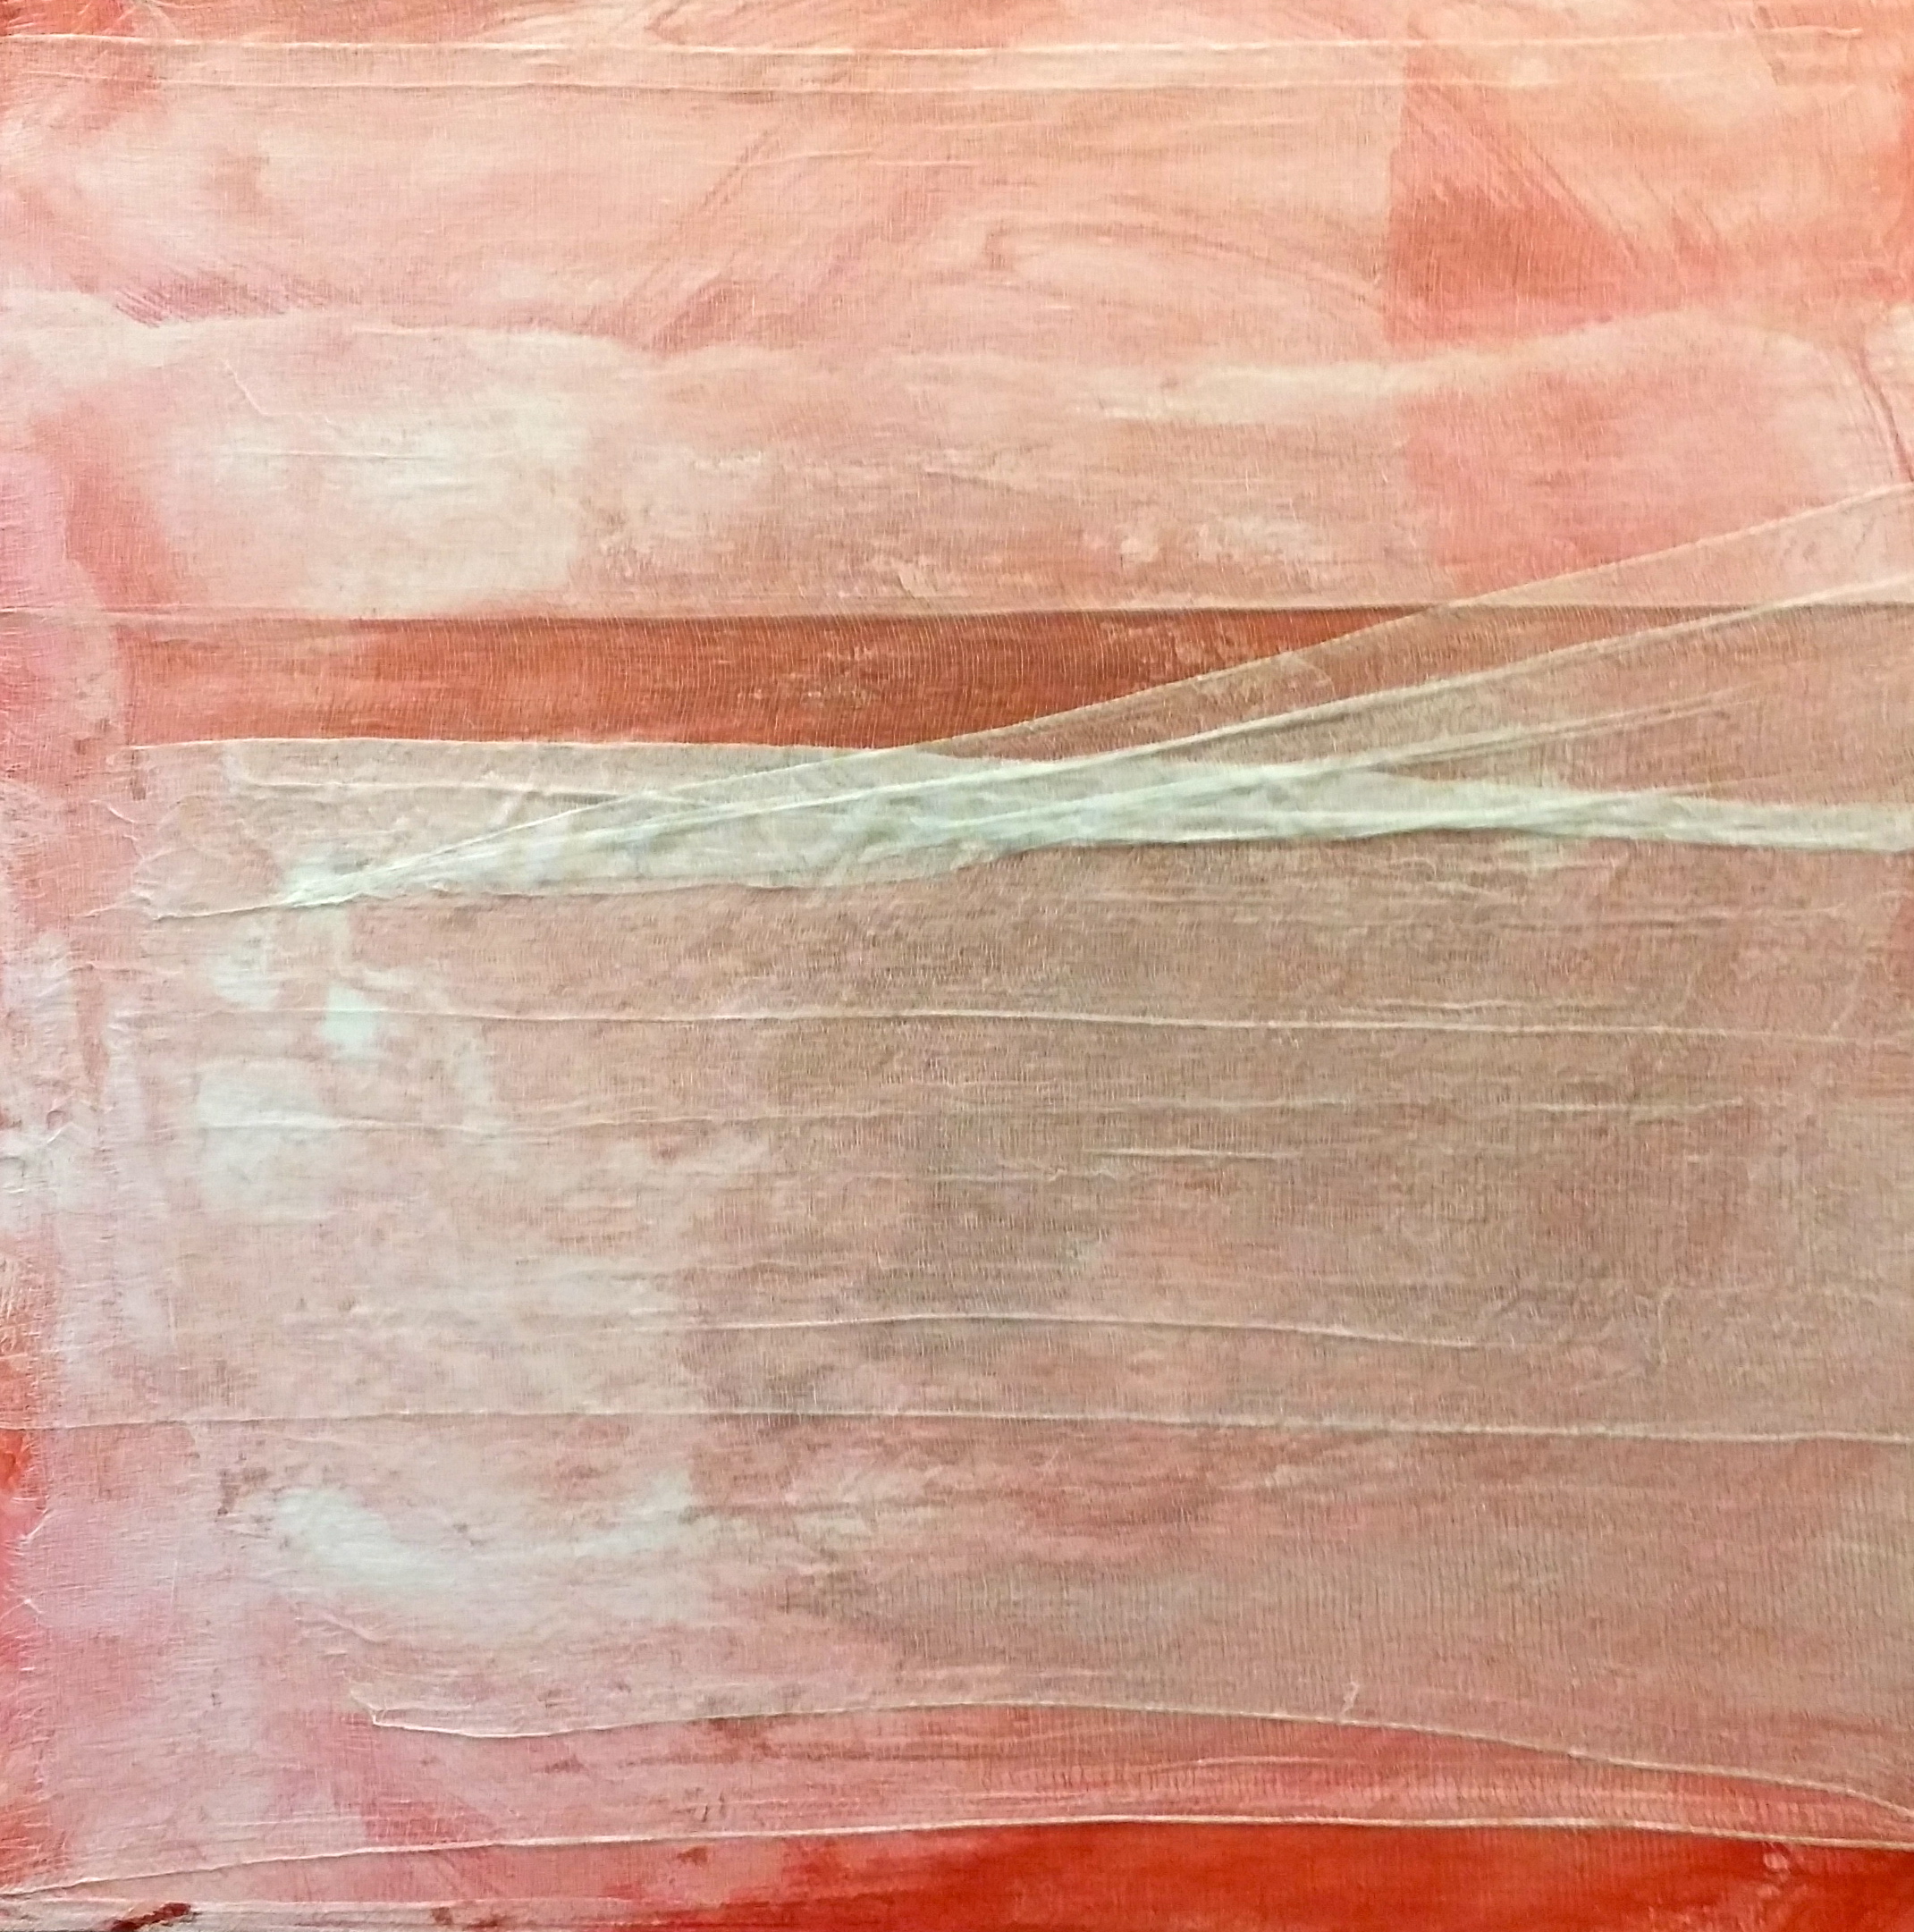  Weightlessness 5, 2015 48 x 48 inches Acrylic, gauze, glue, mixed media on canvas 